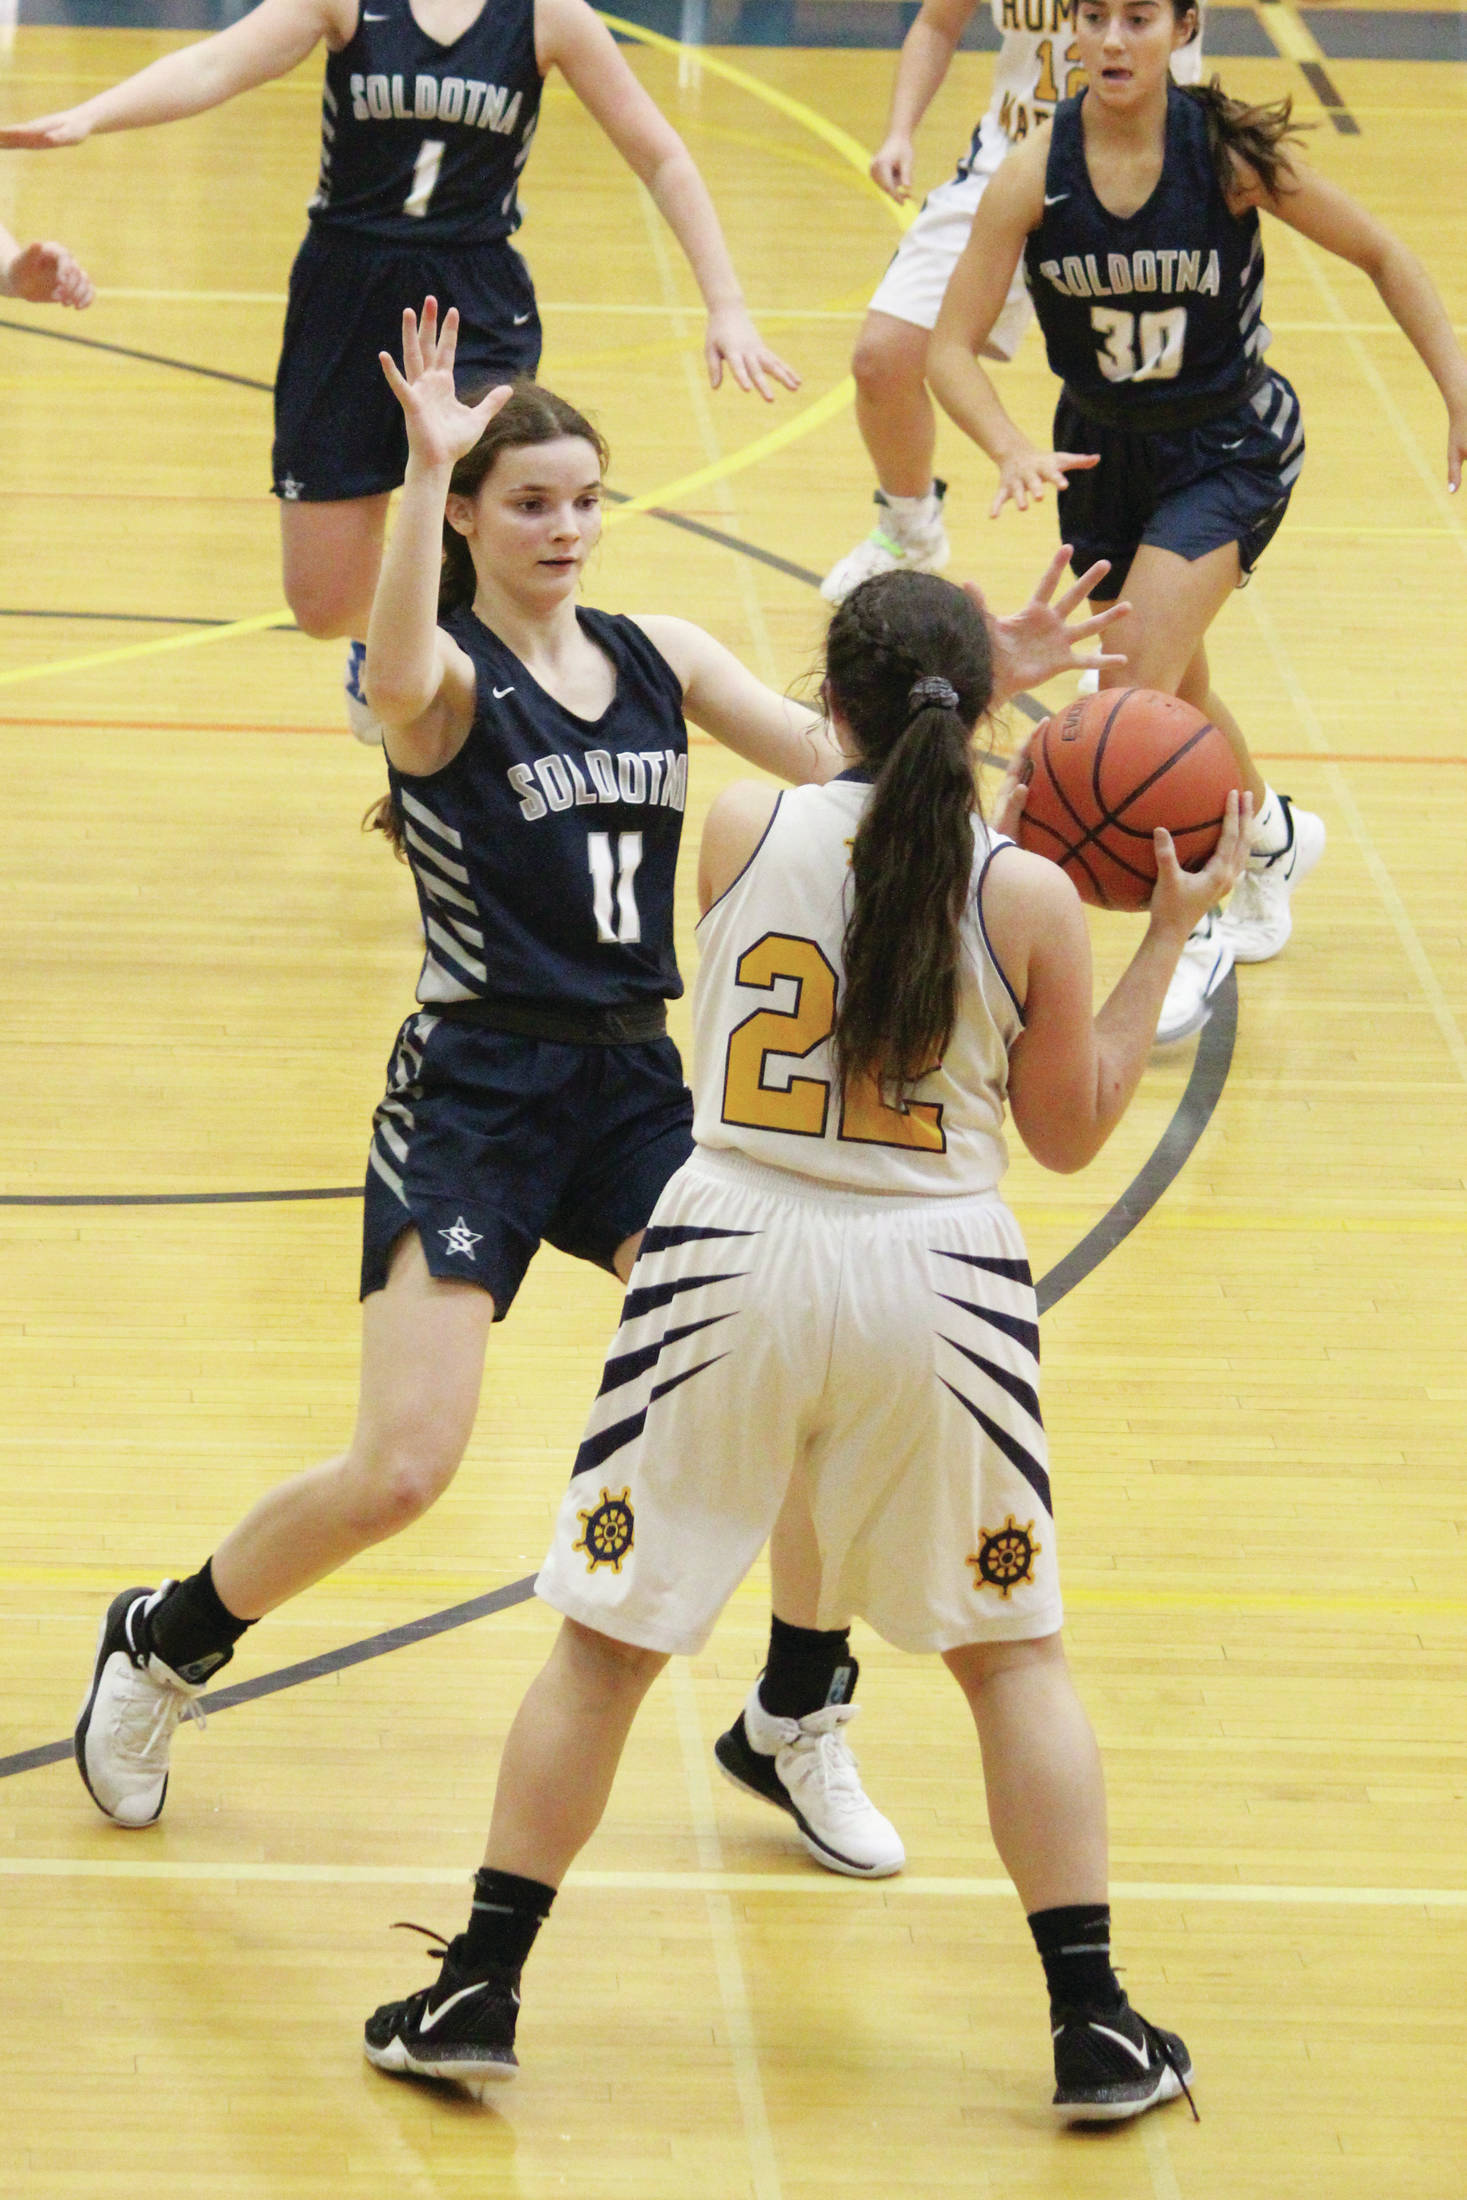 Soldotna’s Morgan Bouschor guards Homer’s Hannah Hatfield during a Tuesday, Feb. 25, 2020 basketball game in the Alice Witte Gymnasium in Homer, Alaska. (Photo by Megan Pacer/Homer News)